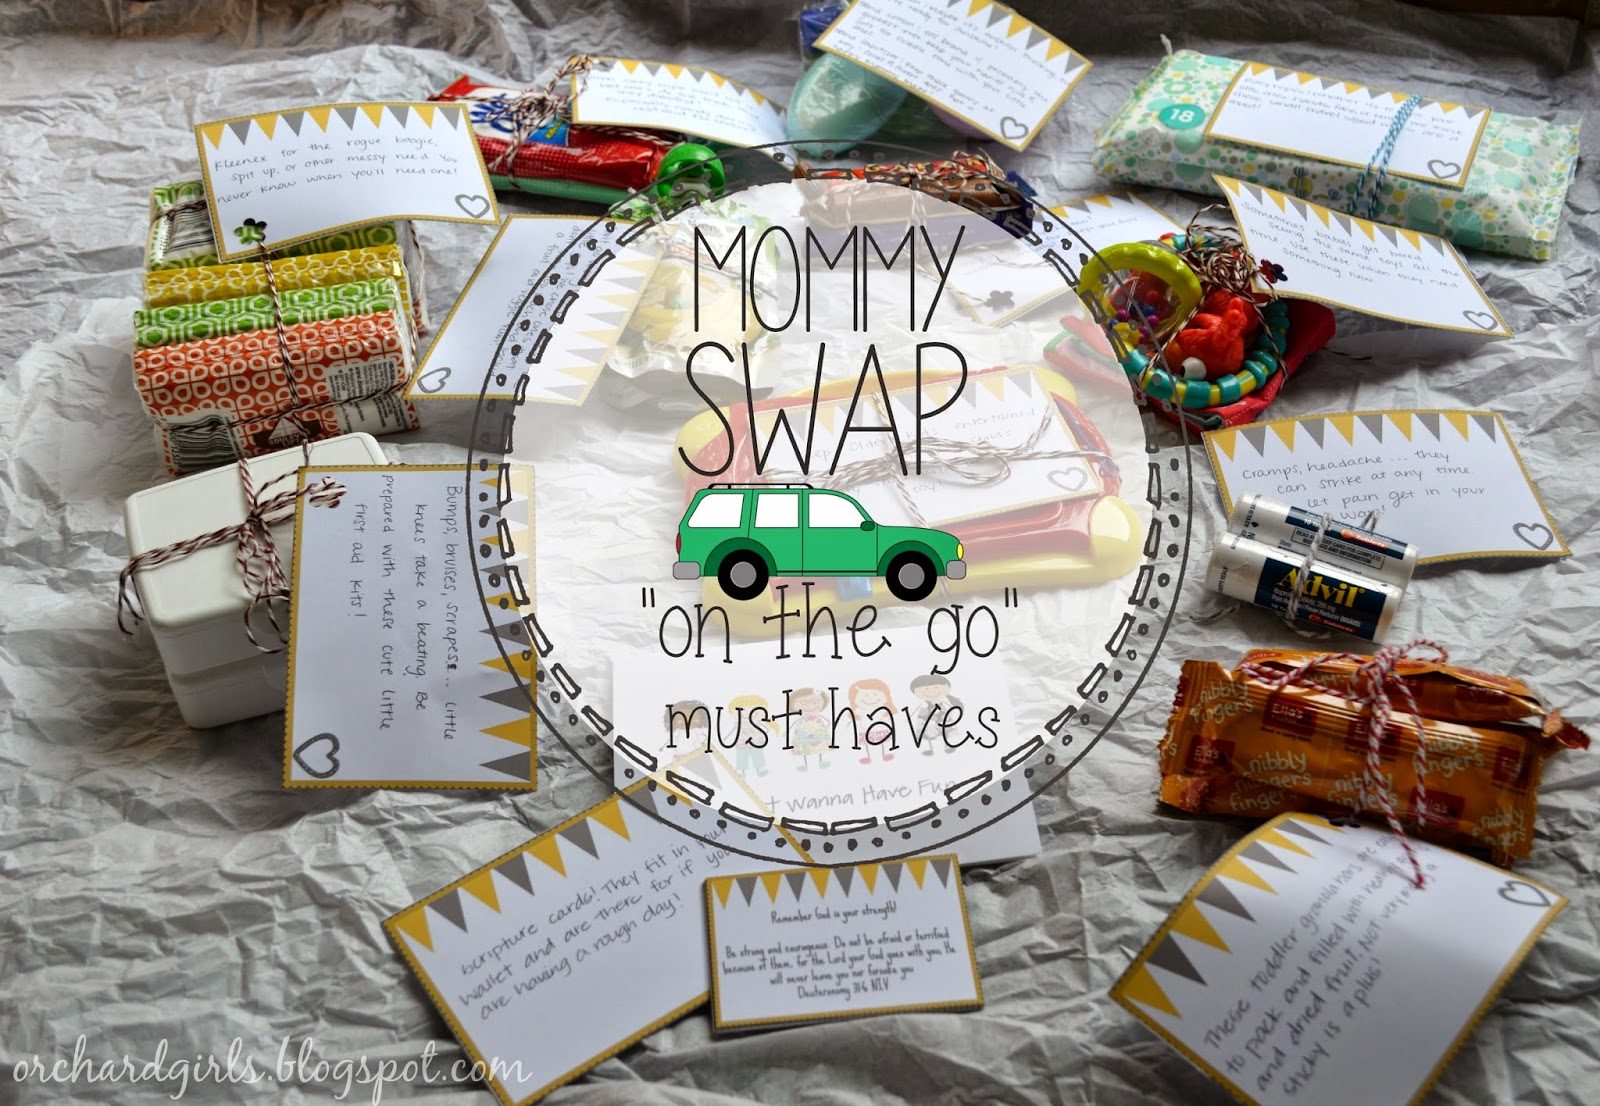 Mommy Swap - On the Go / Must Have Items with Orchard Girls Blog